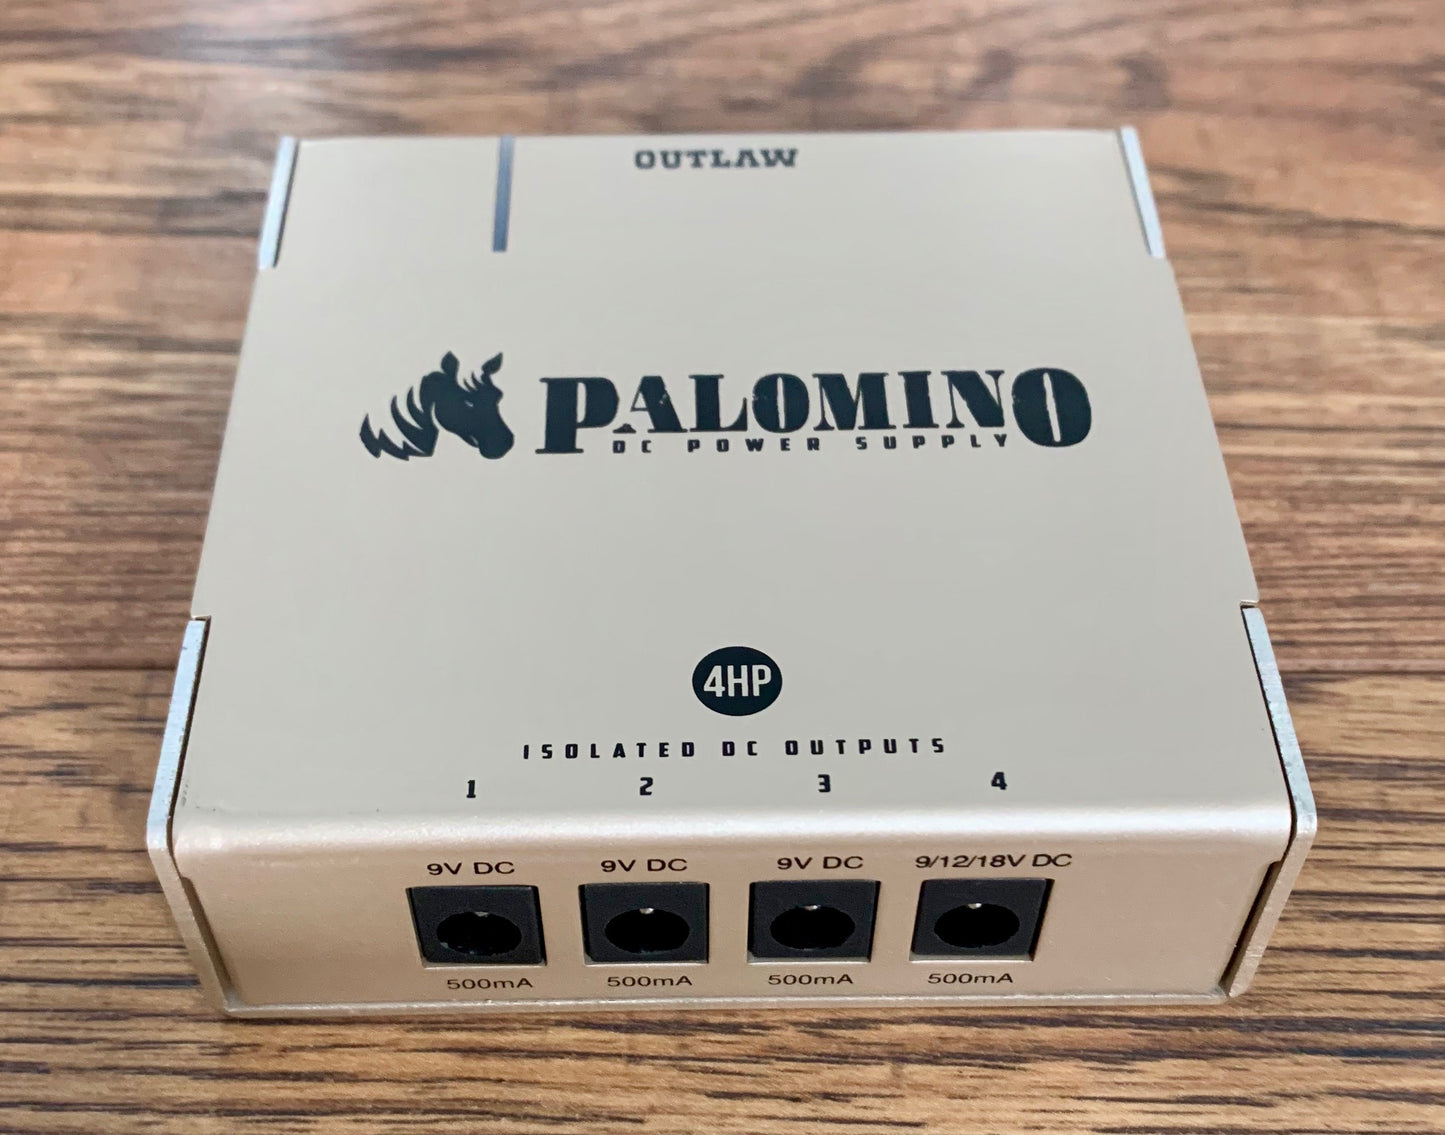 Outlaw Effects Palomino 4HP Isolated Pedalboard Guitar Effect Pedal Power Supply Demo